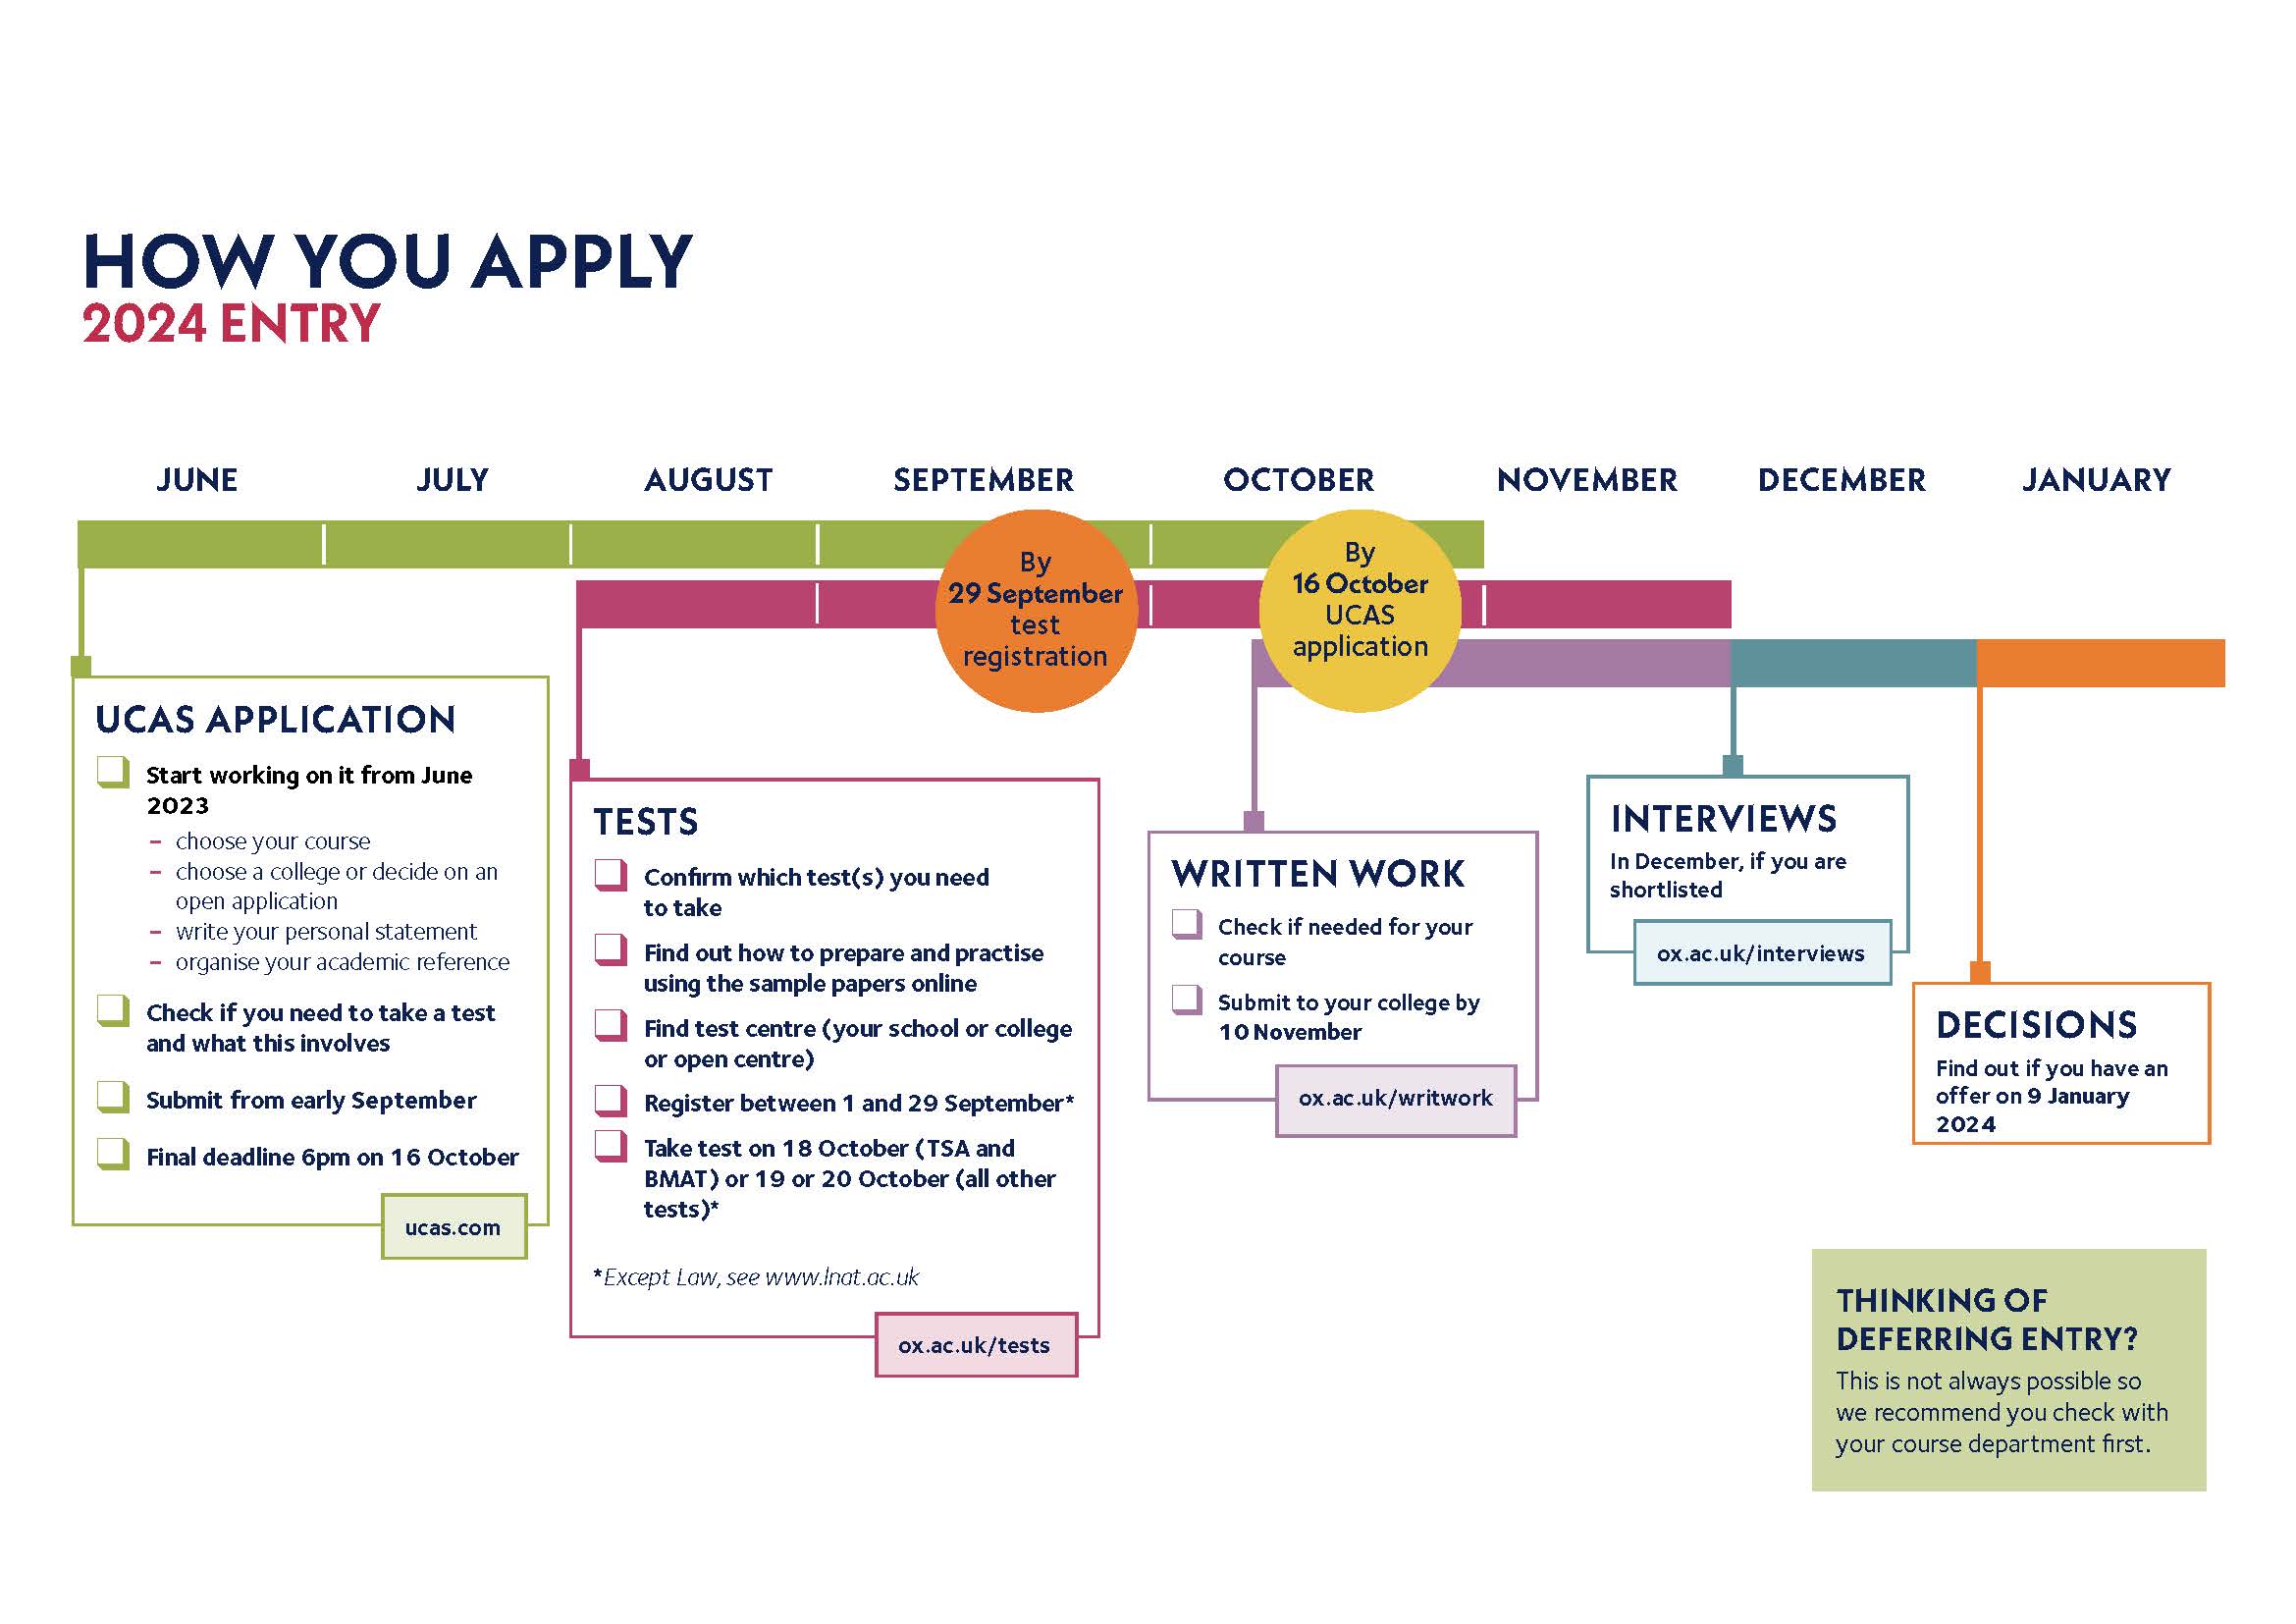 Timeline showing essential dates for applying to Oxford